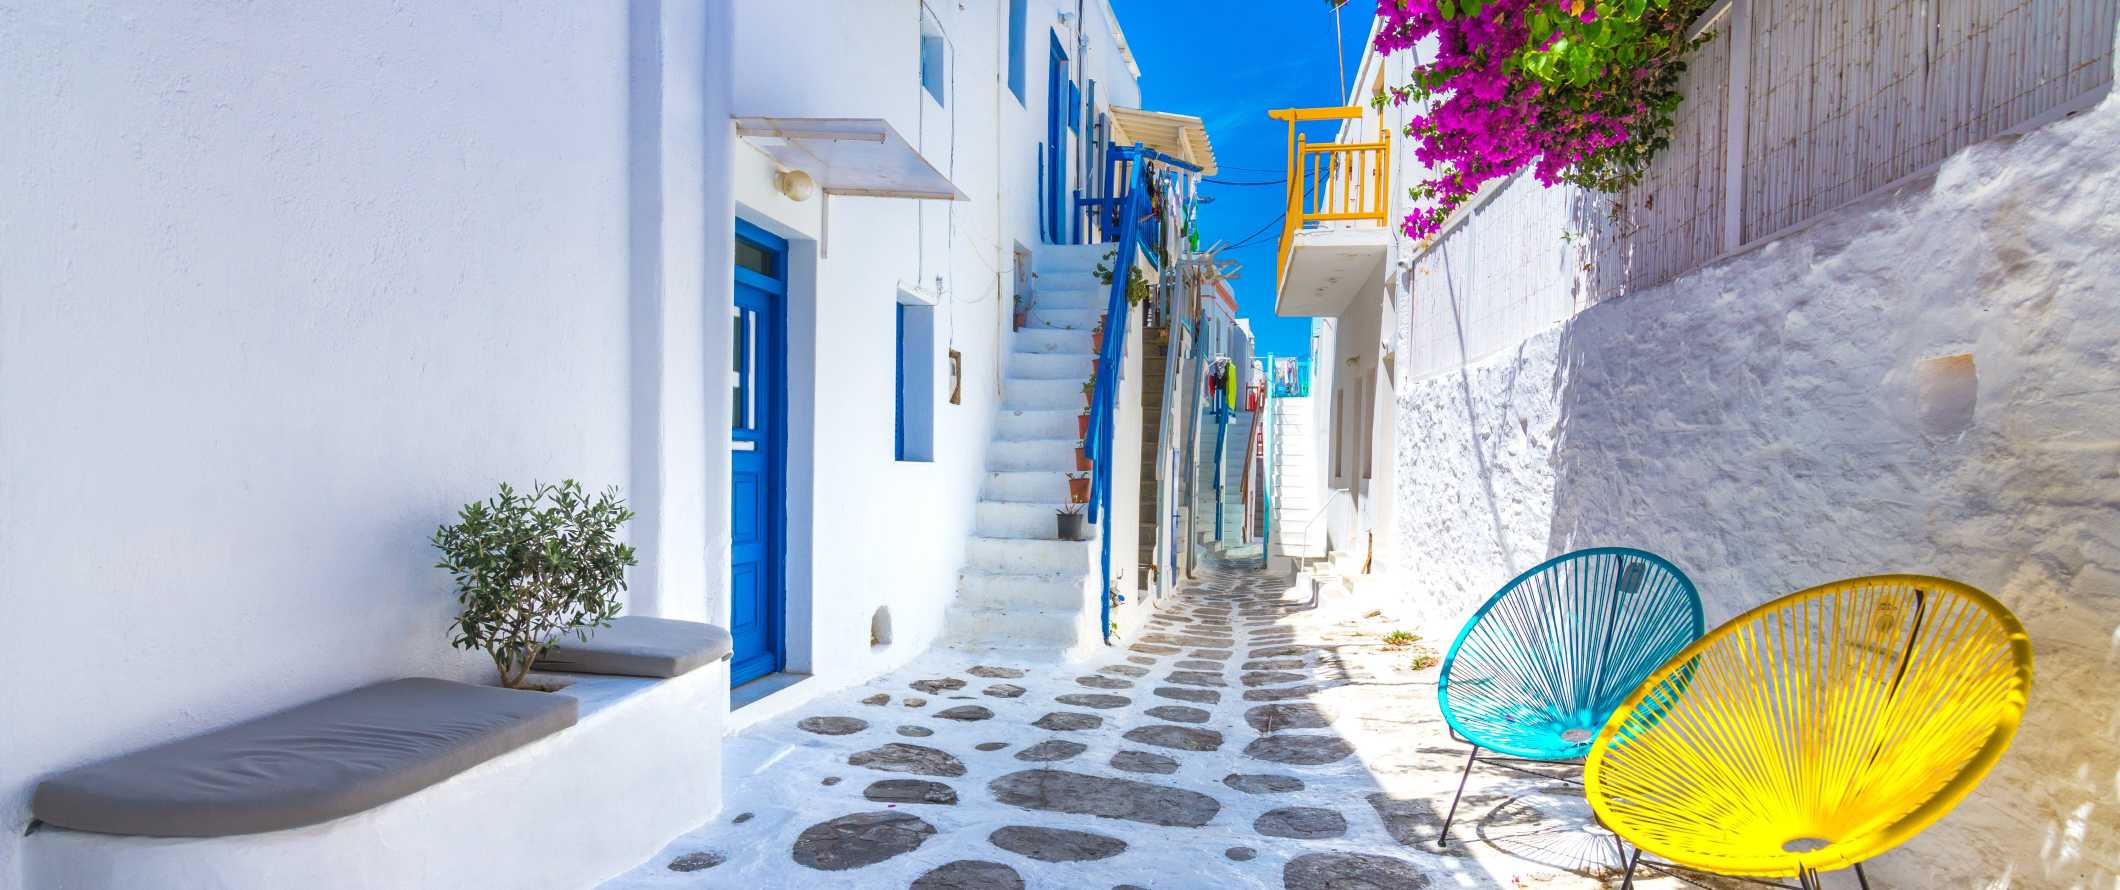 Street in Mykonos old town with white-washed buildings with blue doors and windows on the island of Mykonos in Greece.